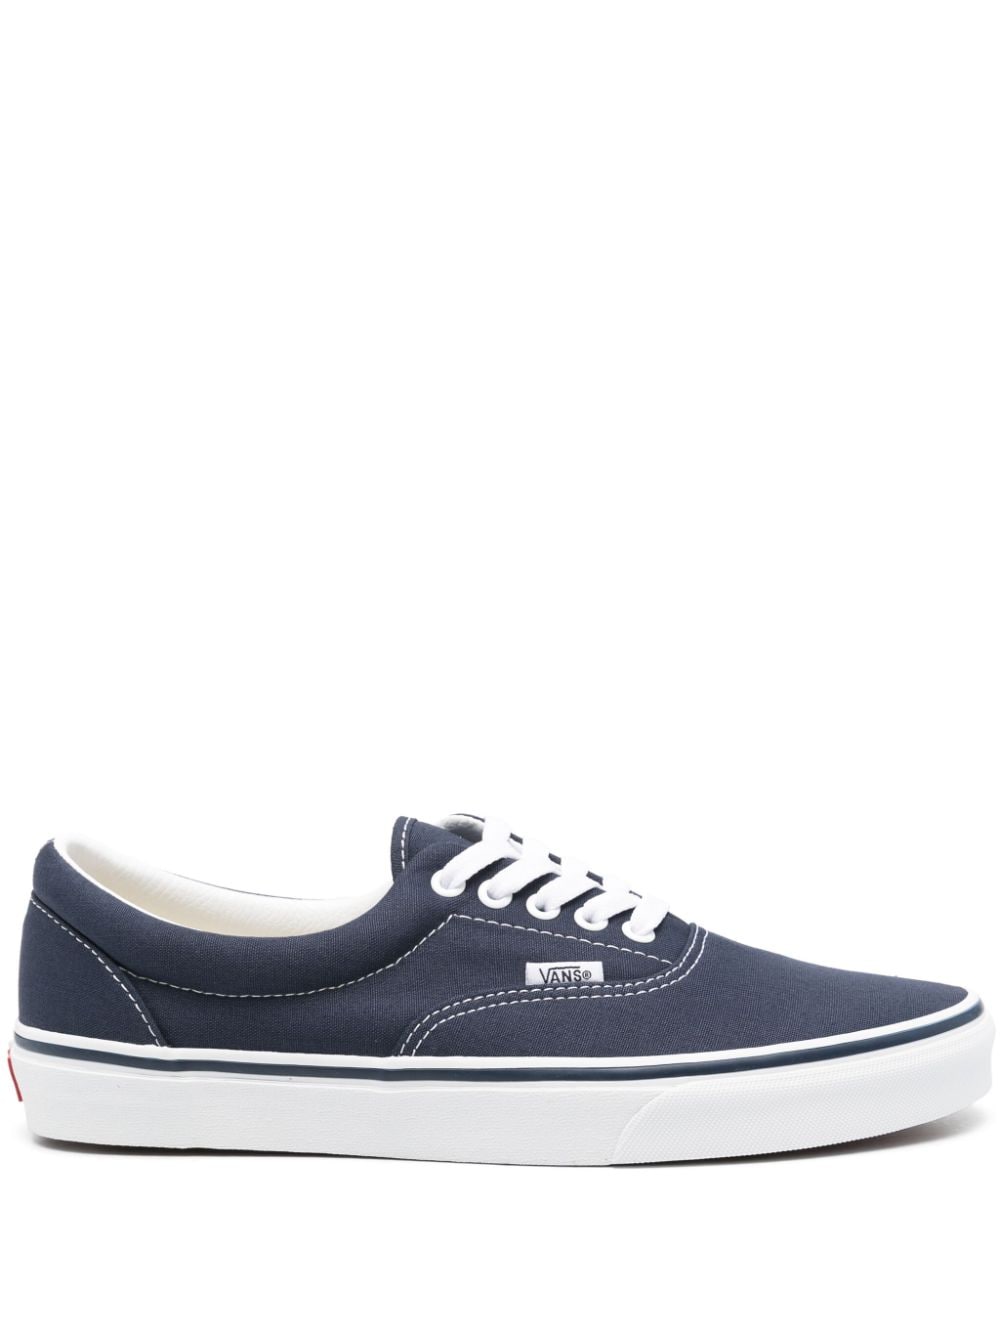 Vans Authentic Canvas Sneakers In Blue